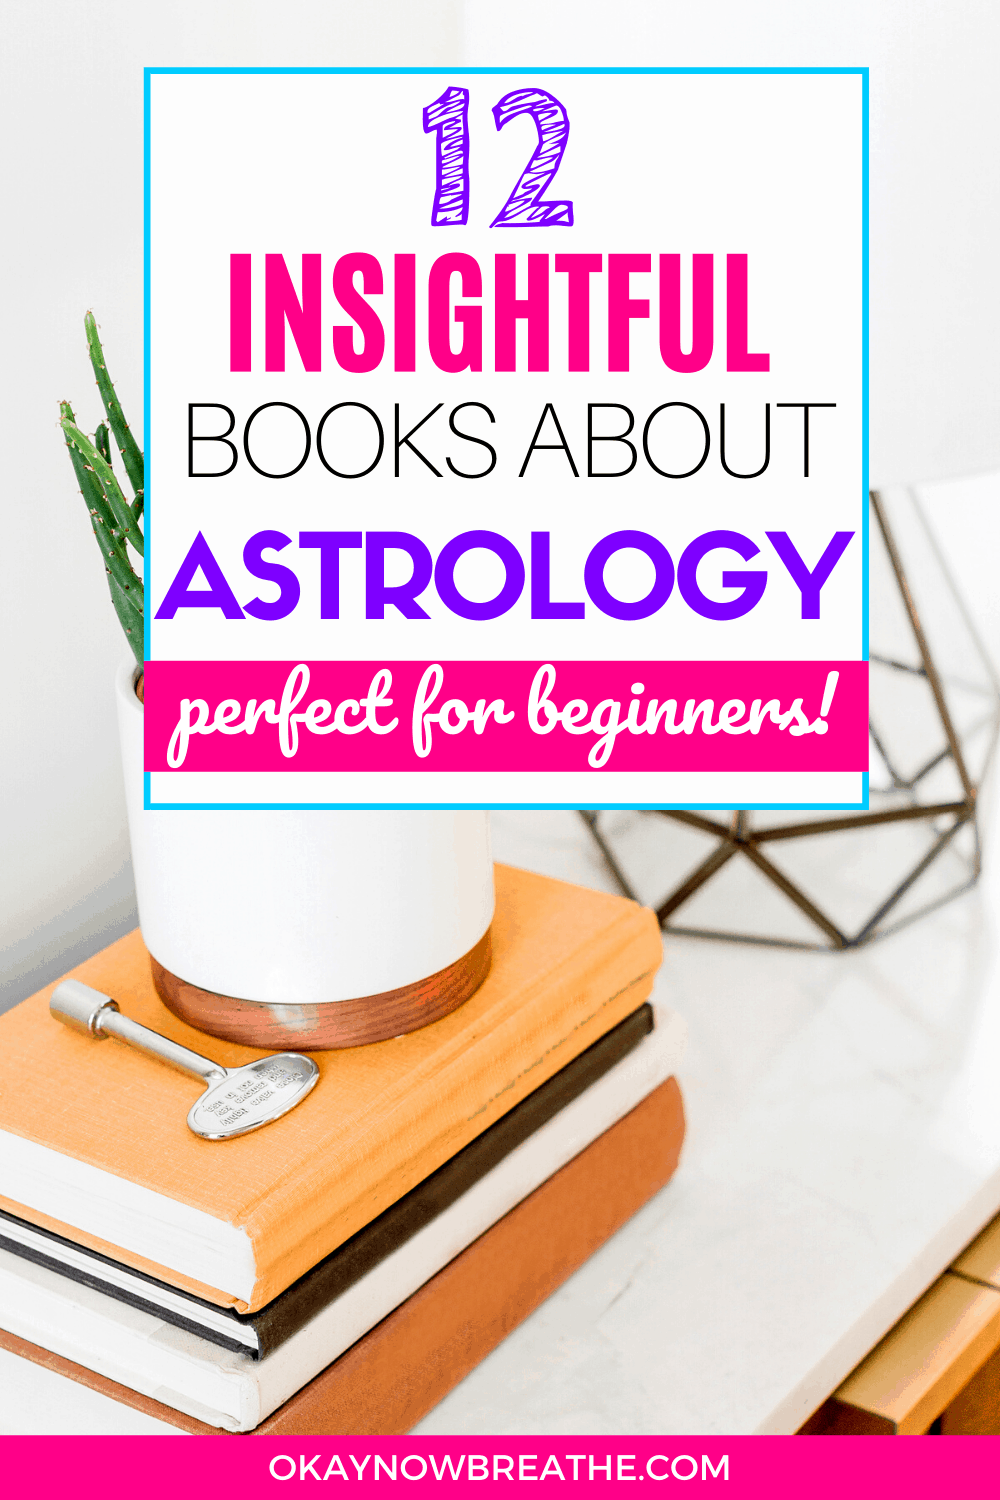 Books stacked on top of each other with a potted plant on top. Title text overlay says 12 insightful books about astrology. Perfect for beginners!